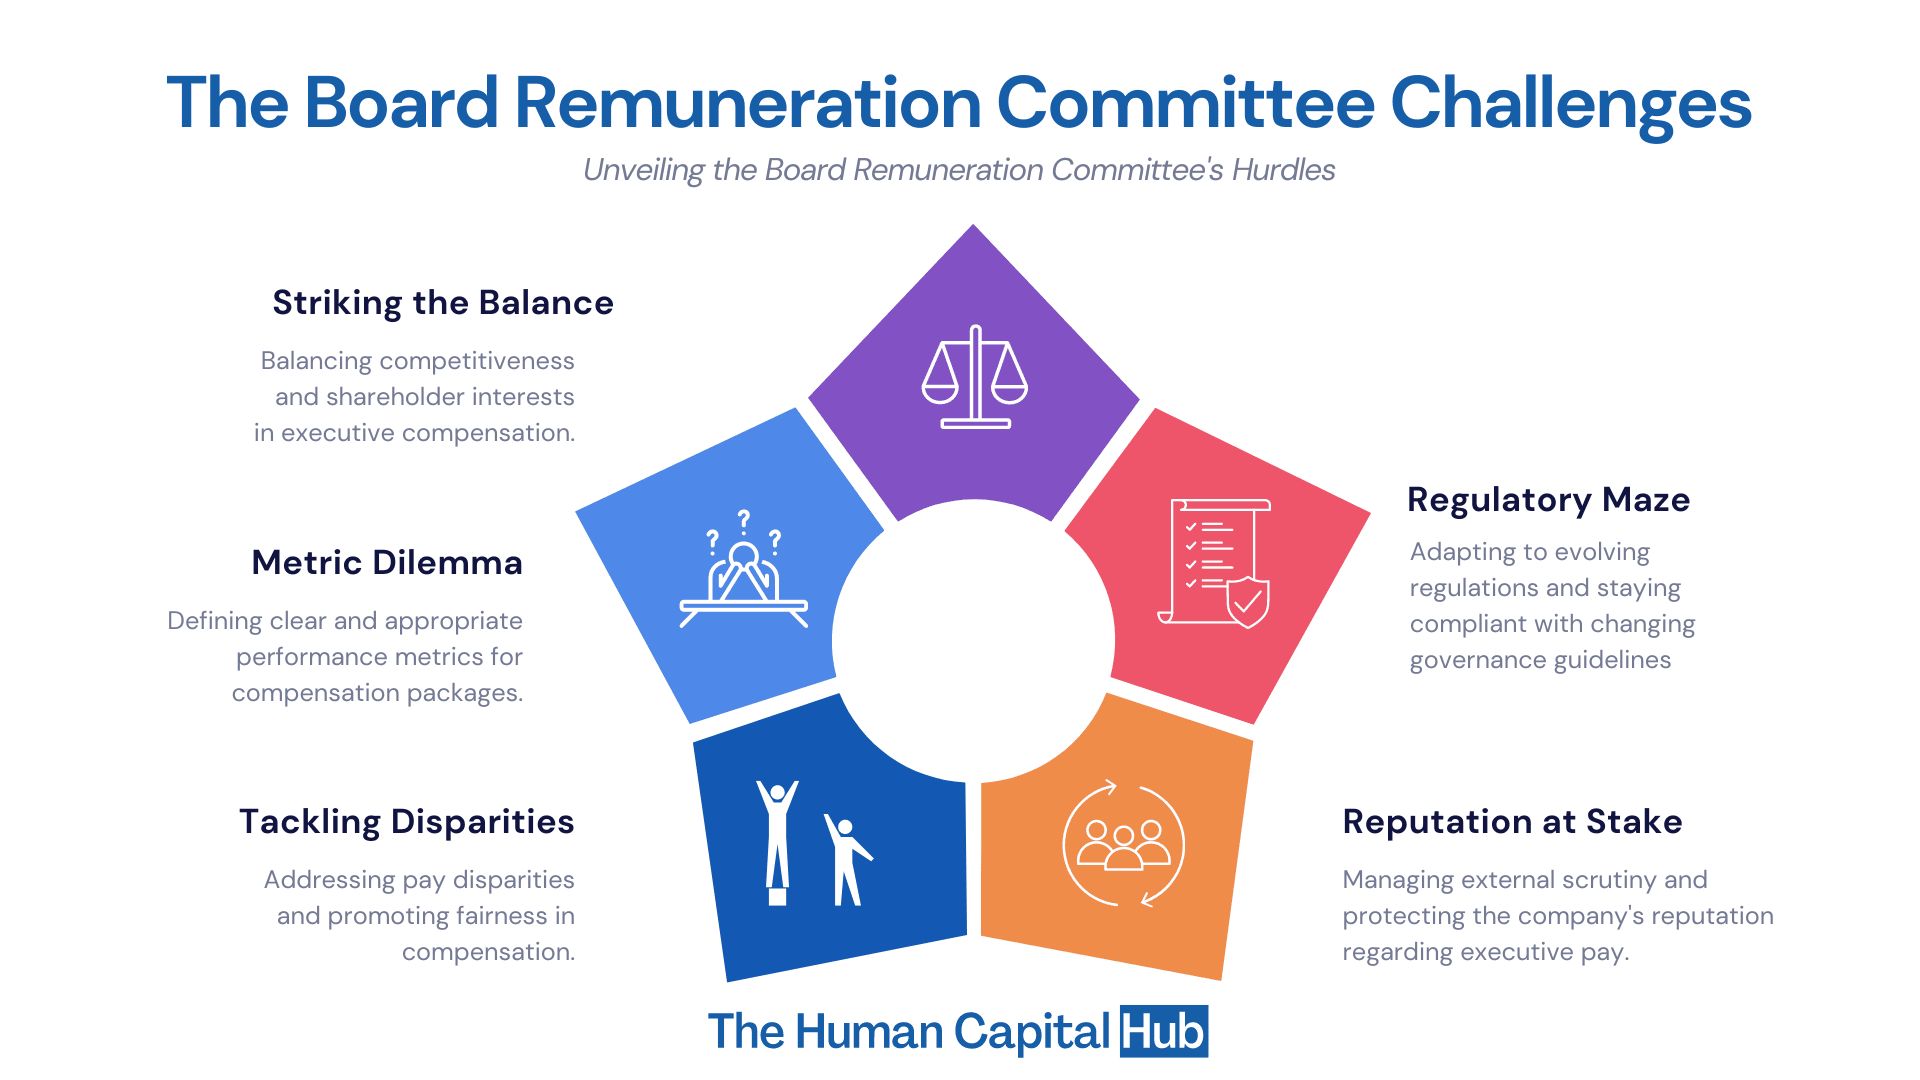 The Board Remuneration Committee: The Challenges